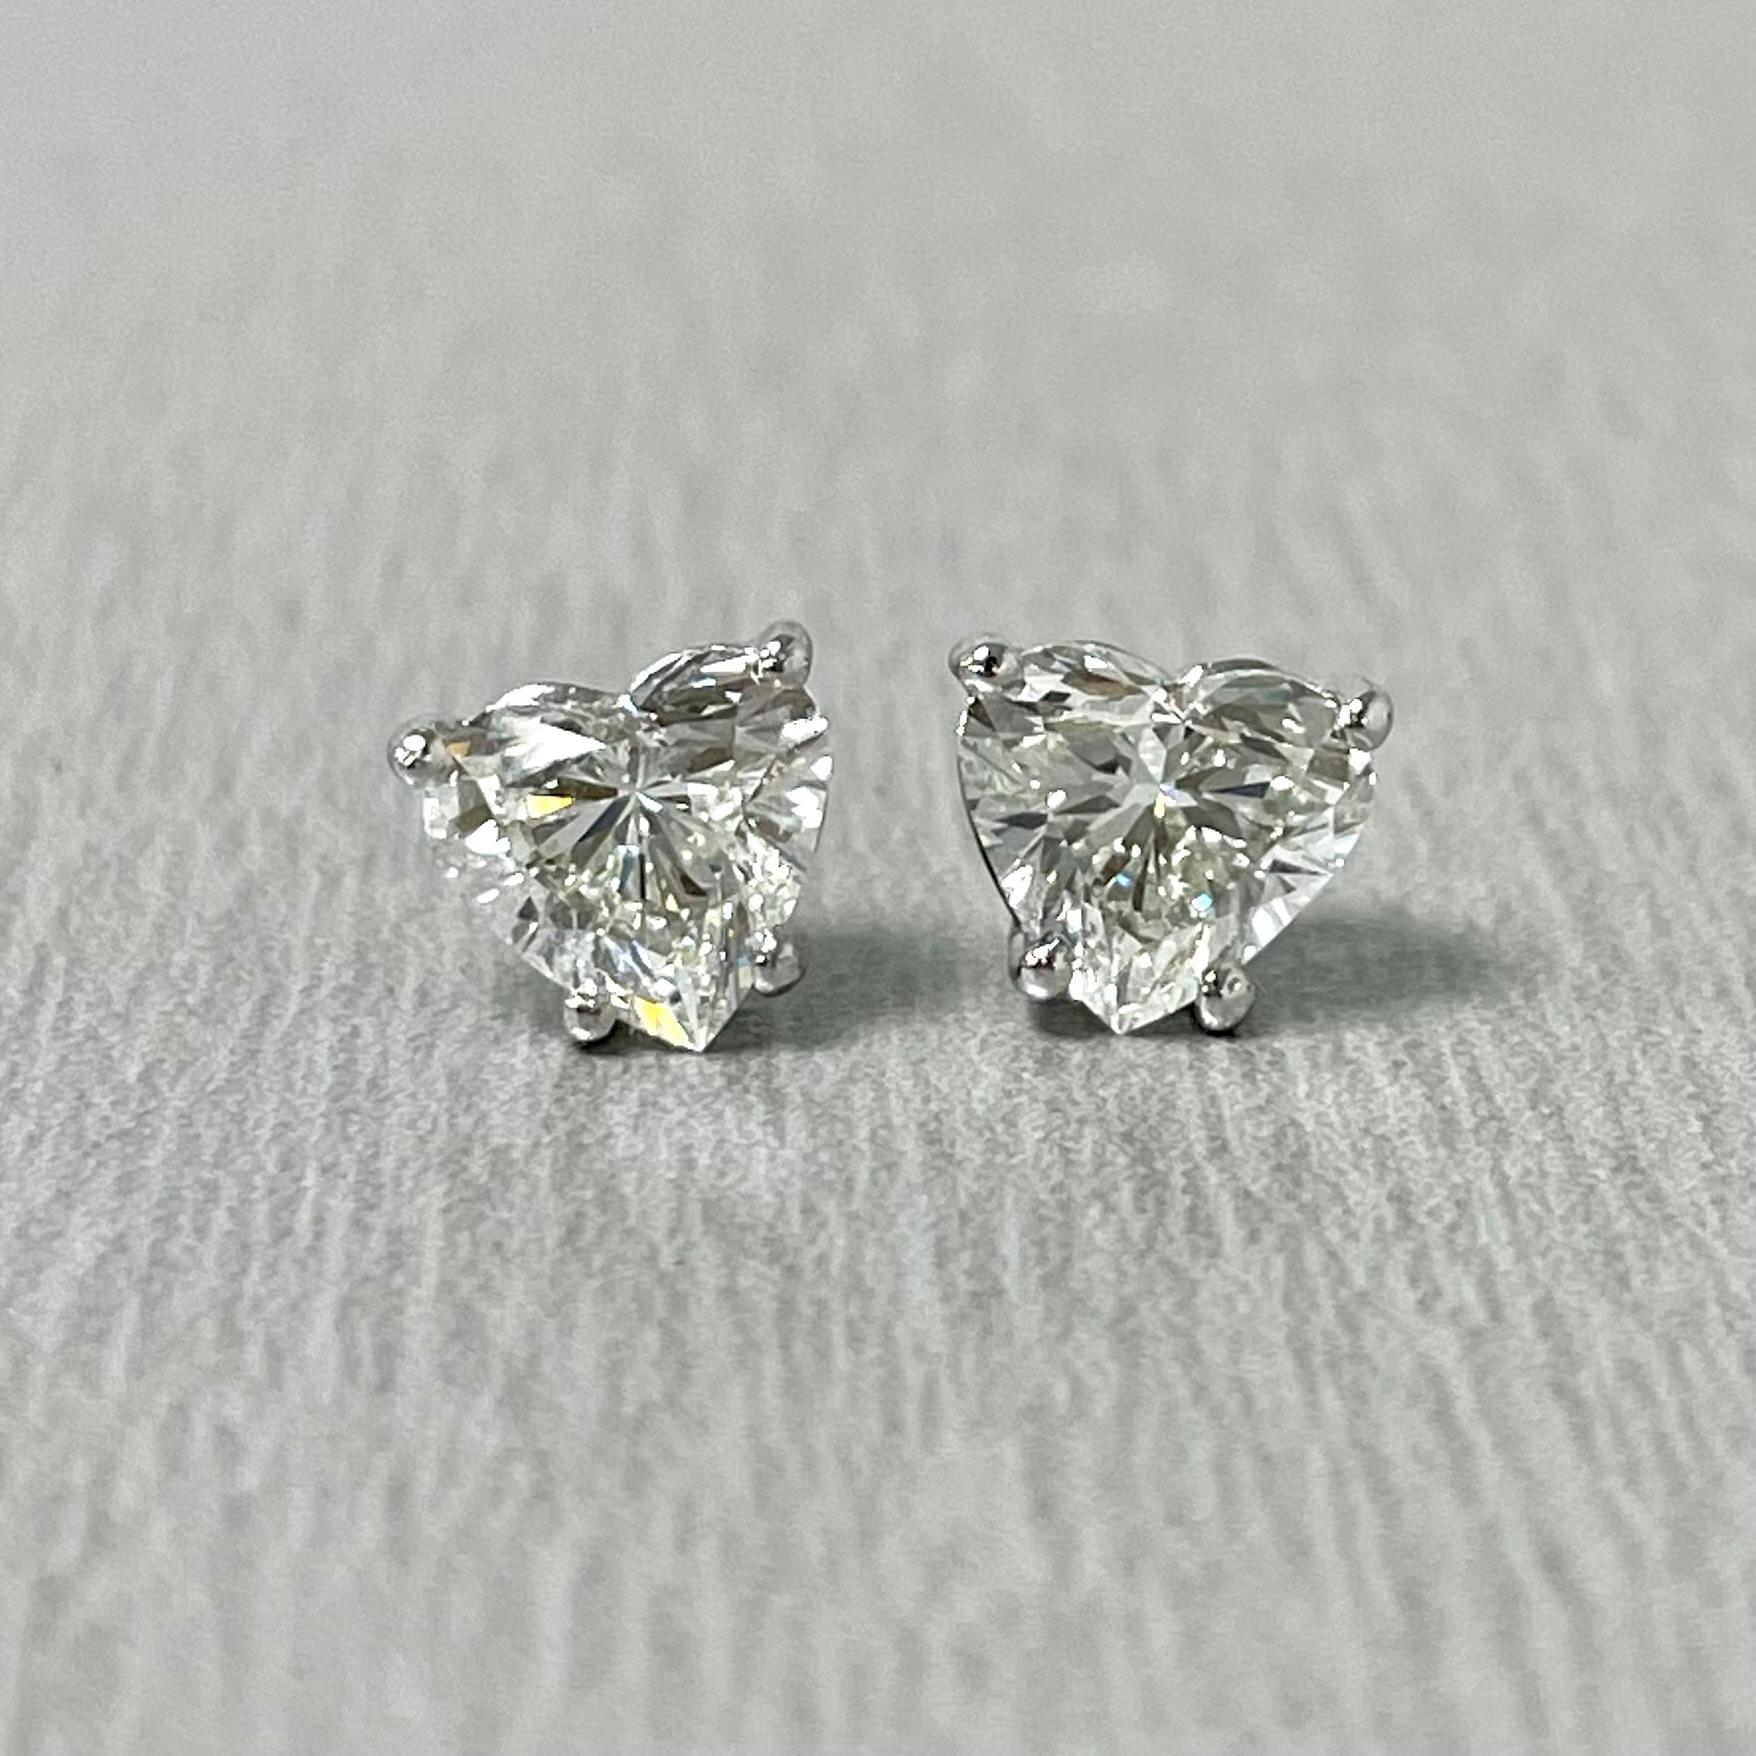 Diamond solitaire studs are a signature everyday piece of jewelry. They are a classic and a statement simultaneously. 

This particular pair of Heart Shape Studs features a depth of 58.3% and 57.1% enabling it to look more like a pair of 1.00 ct